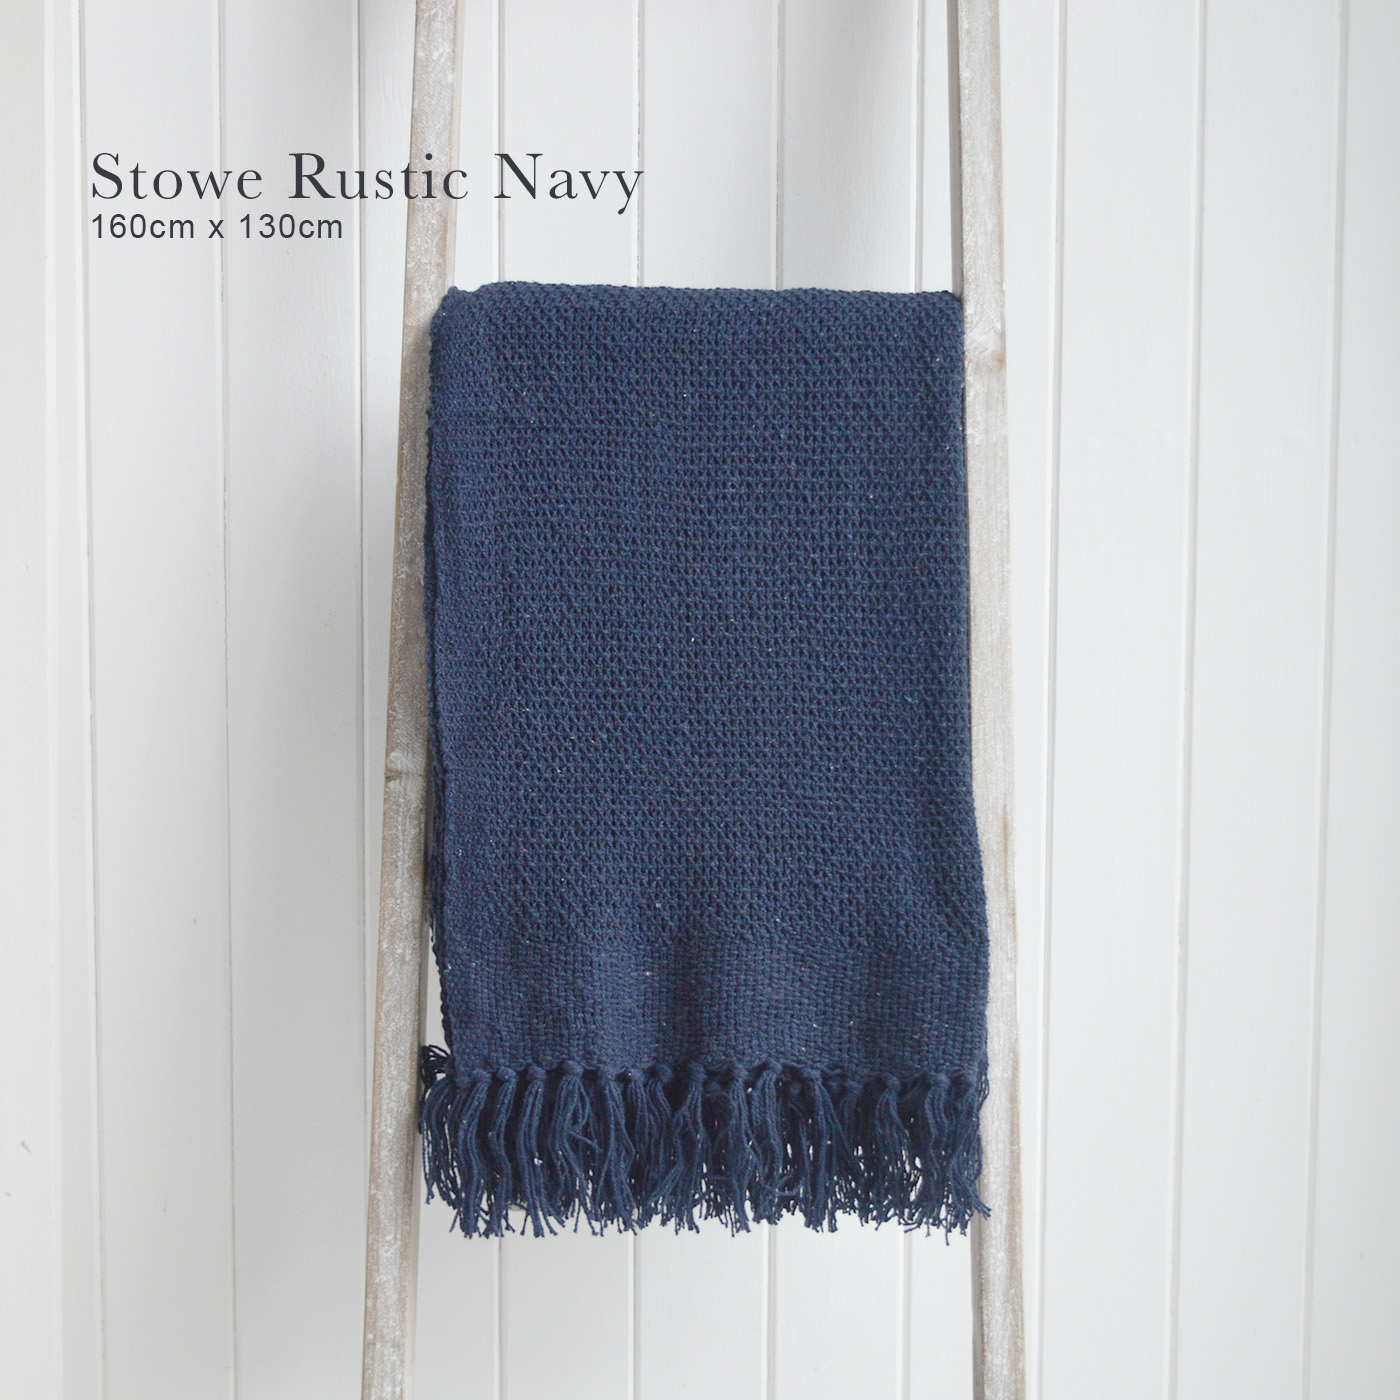 Stowe throws in blues, greys and natural coloures  for interiors in New England styles modern farmhouse, country, coastal and city homes - Rustic Navy